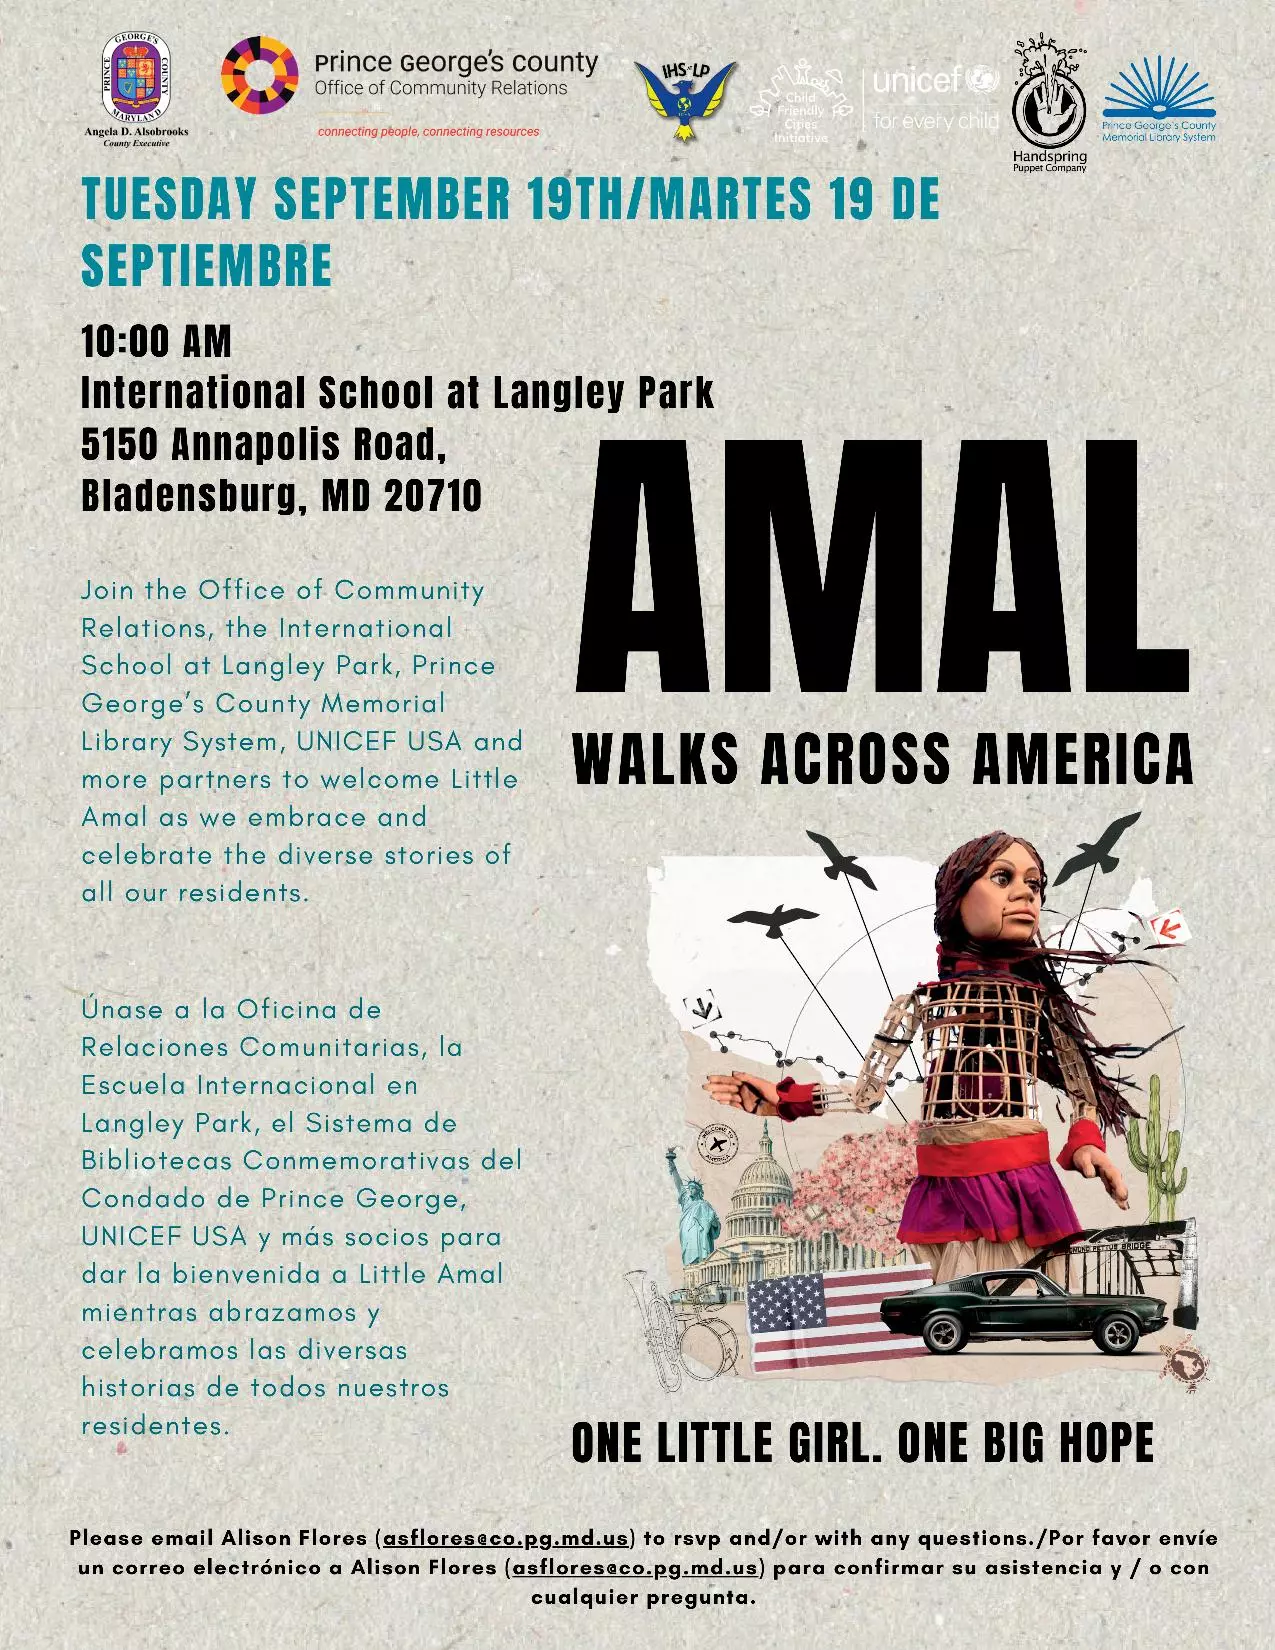 Join the Office of Community Relations, the International High School at Langley Park, UNICEF USA, and more partners to welcome Little Amal to the County, as we celebrate the diverse stories of all our residents. Learn more: https://walkwithamal.org/events/i-love-to-learn. 